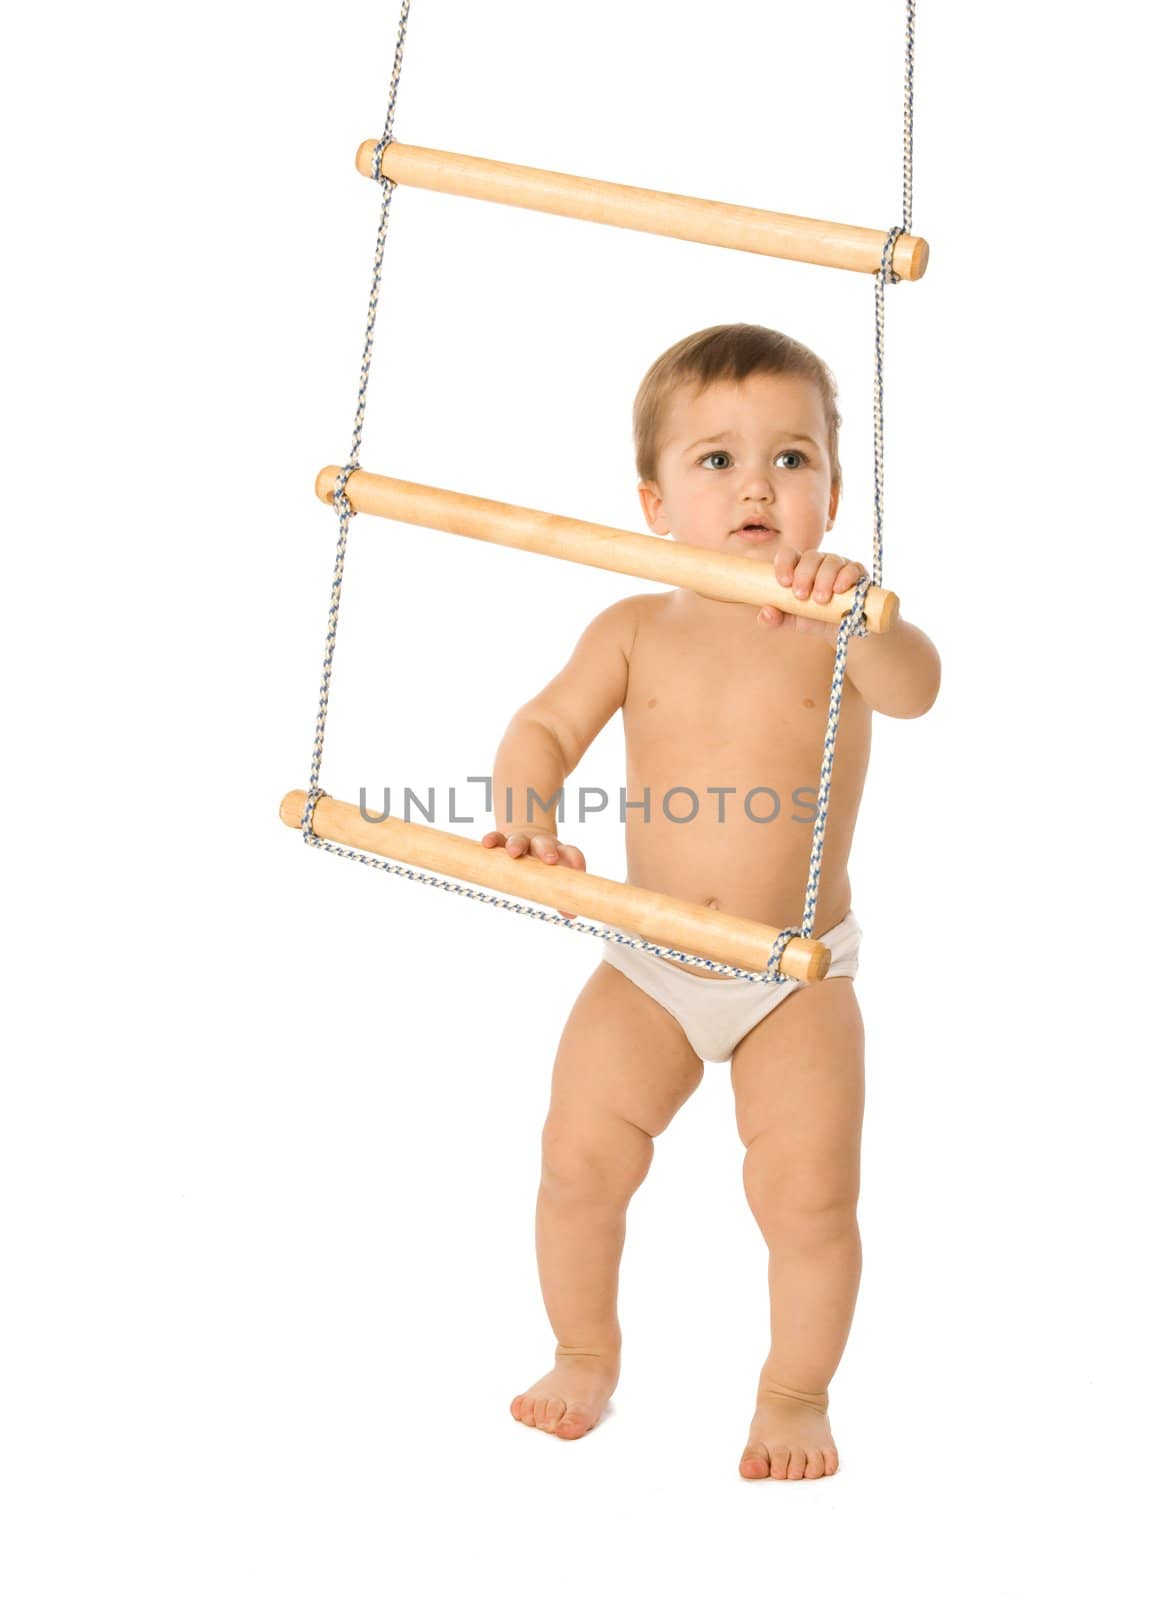 A little boy trying to climb a rope-ladder
